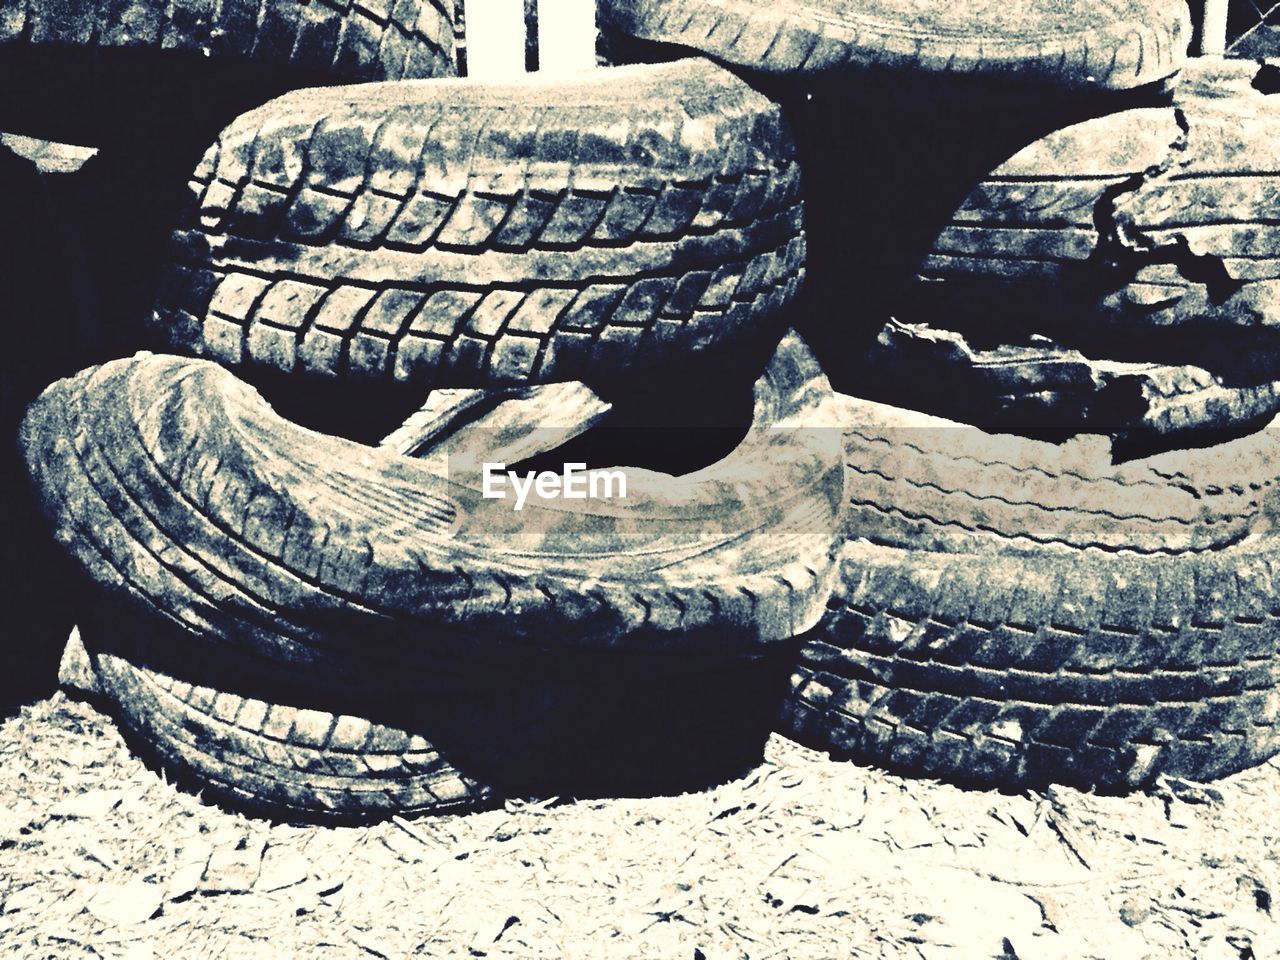 Stack of old tires in dust